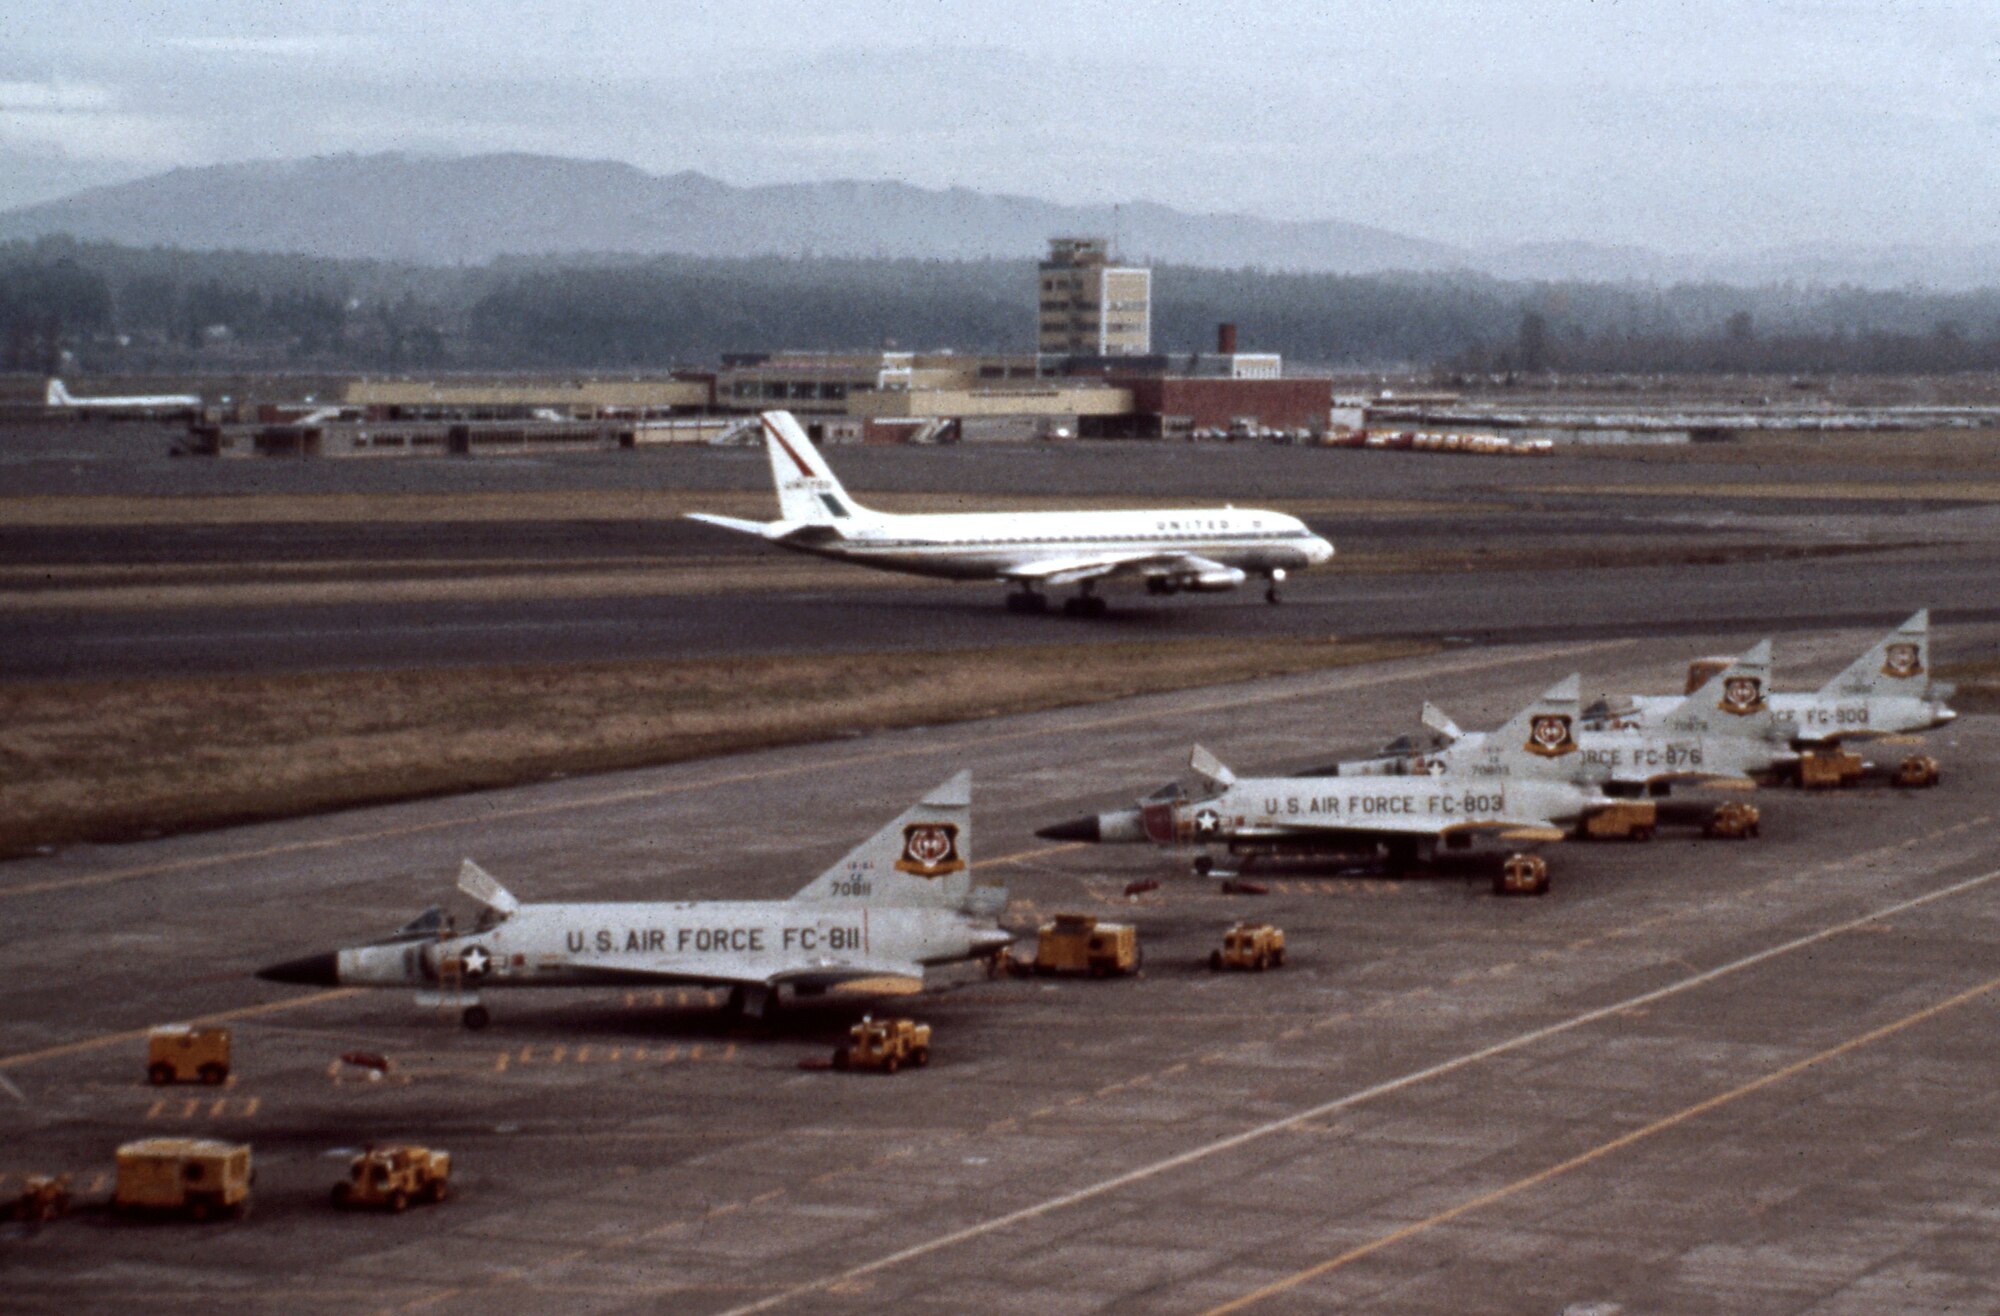 A row of F-102 Delta Daggers assigned to the 337th Fighter Group stand ready at the Portland Air Force Base, Ore., as a commercial aircraft taxis along a shared runway at the Portland International Airport. The photograph was taken in the early 1960’s when the 337th shared the alert mission with the 142nd Fighter Group prior to the official transfer of the aircraft and full time alert mission to the 142nd on April 1, 1966. (photo courtesy of the 142nd Fighter Wing History Office)